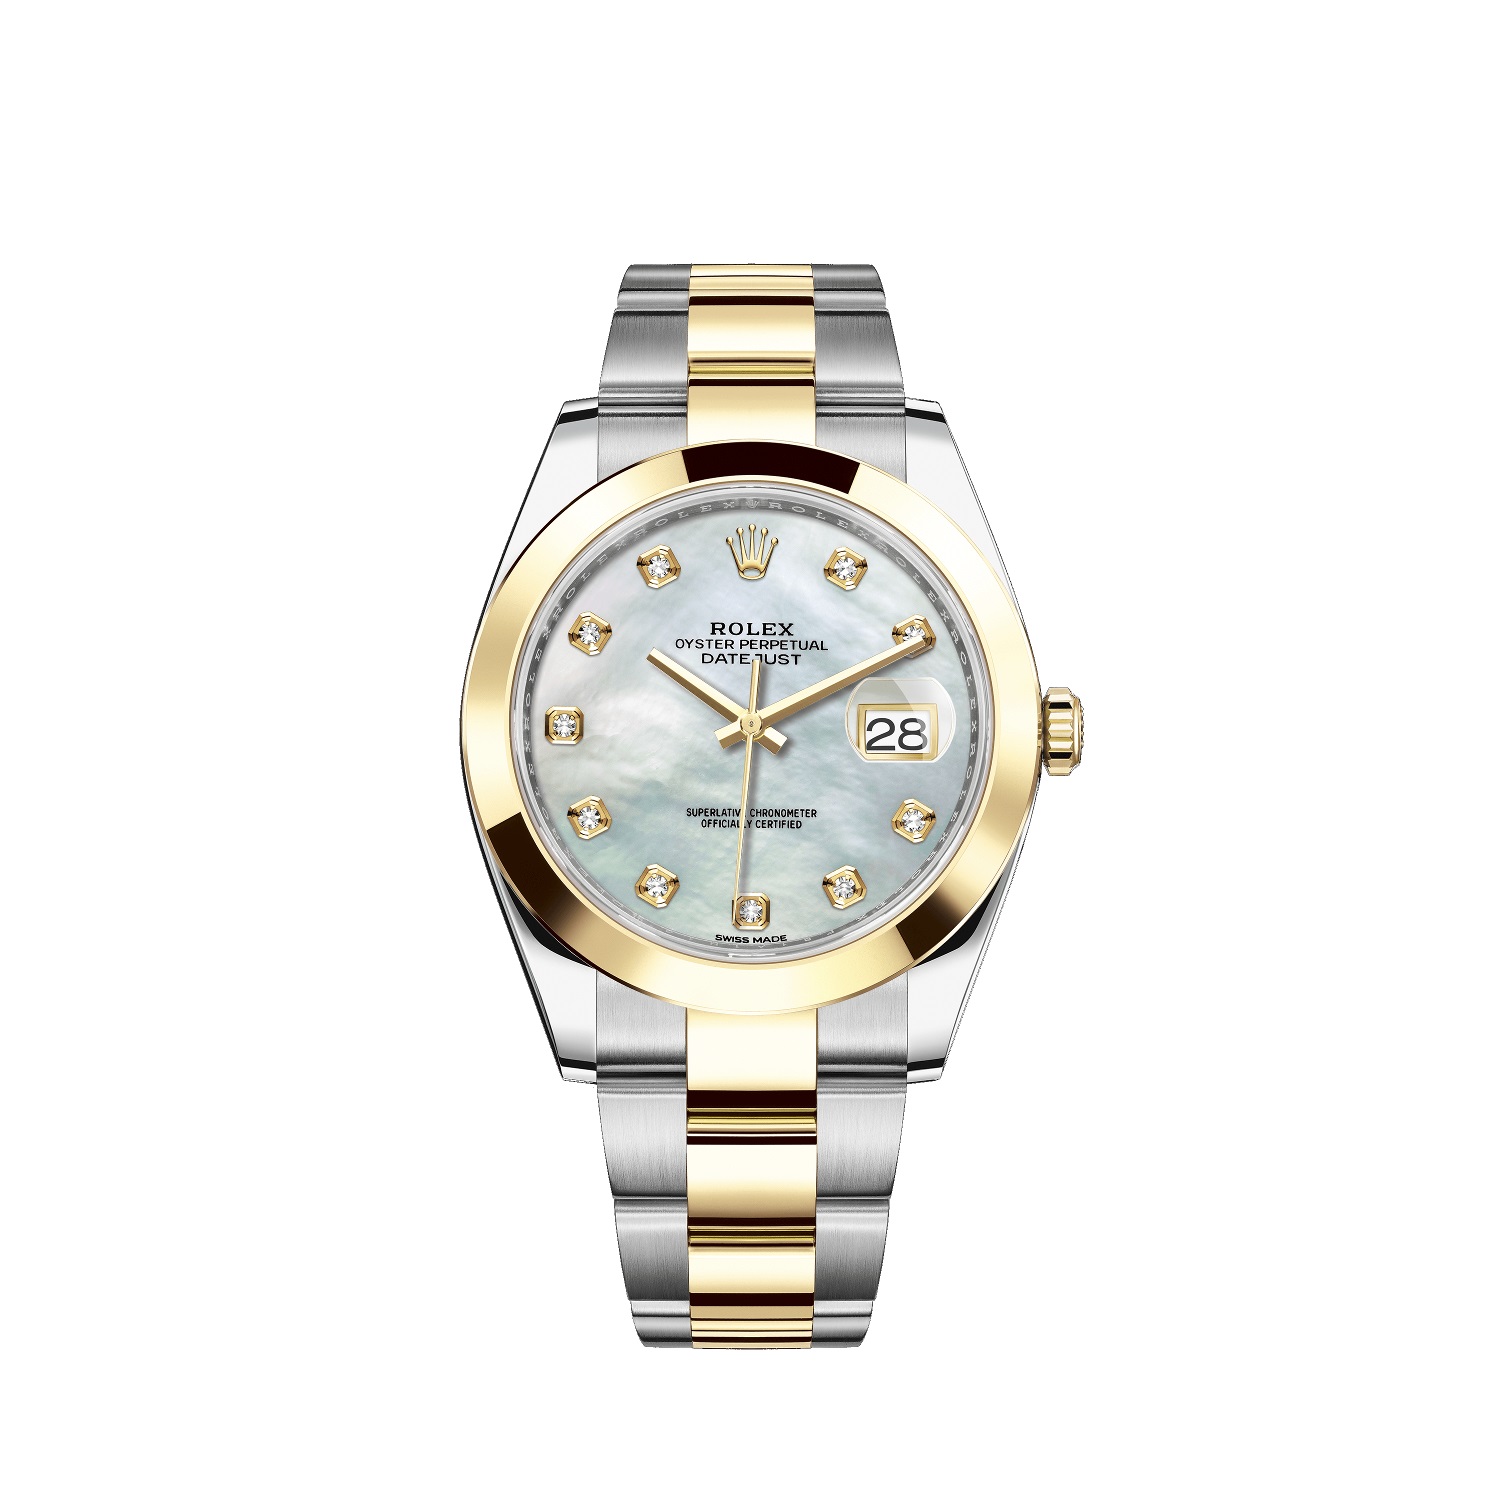 Datejust 41 126303 Gold & Stainless Steel Watch (White Mother-of-Pearl Set with Diamonds)